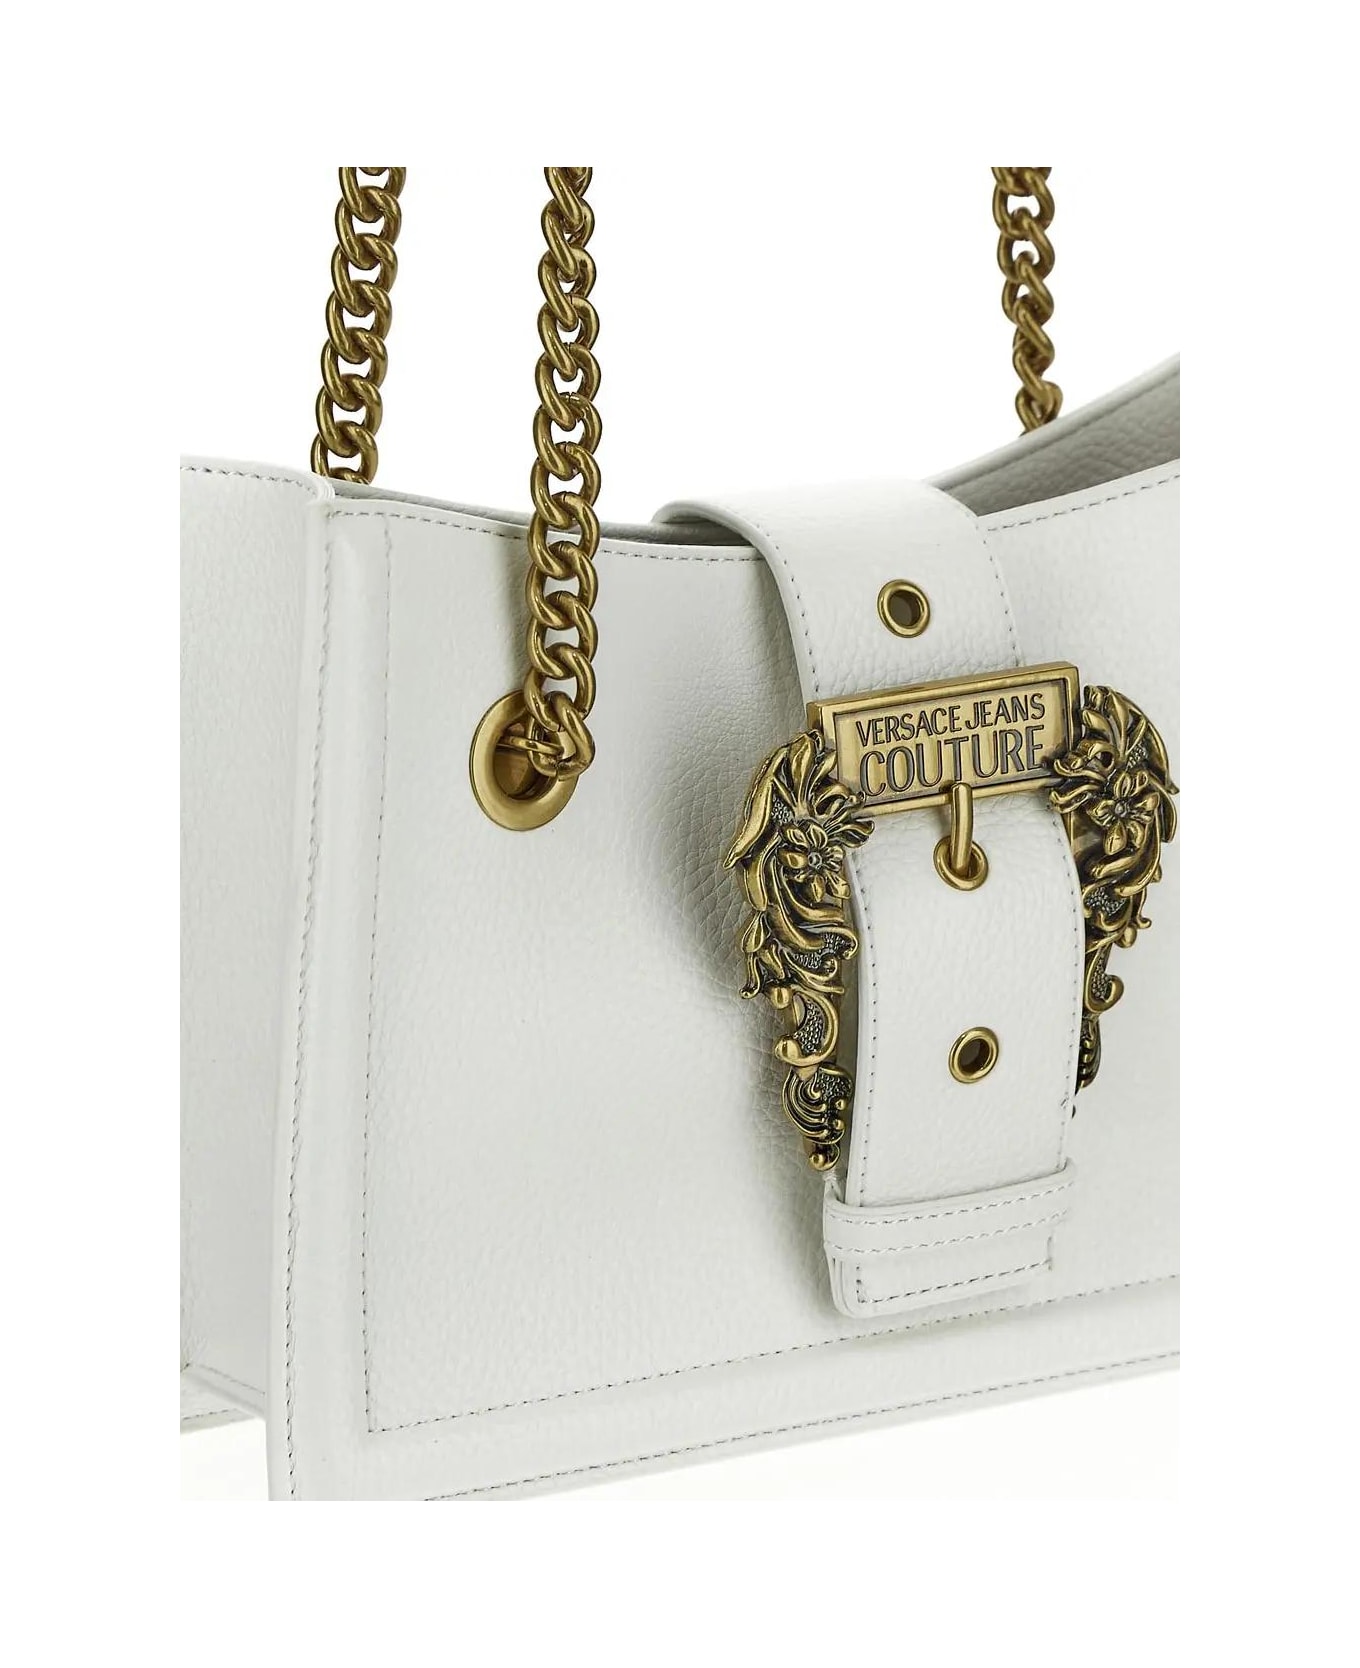 Versace Jeans Couture Embossed Buckle Shoulder Bag - White